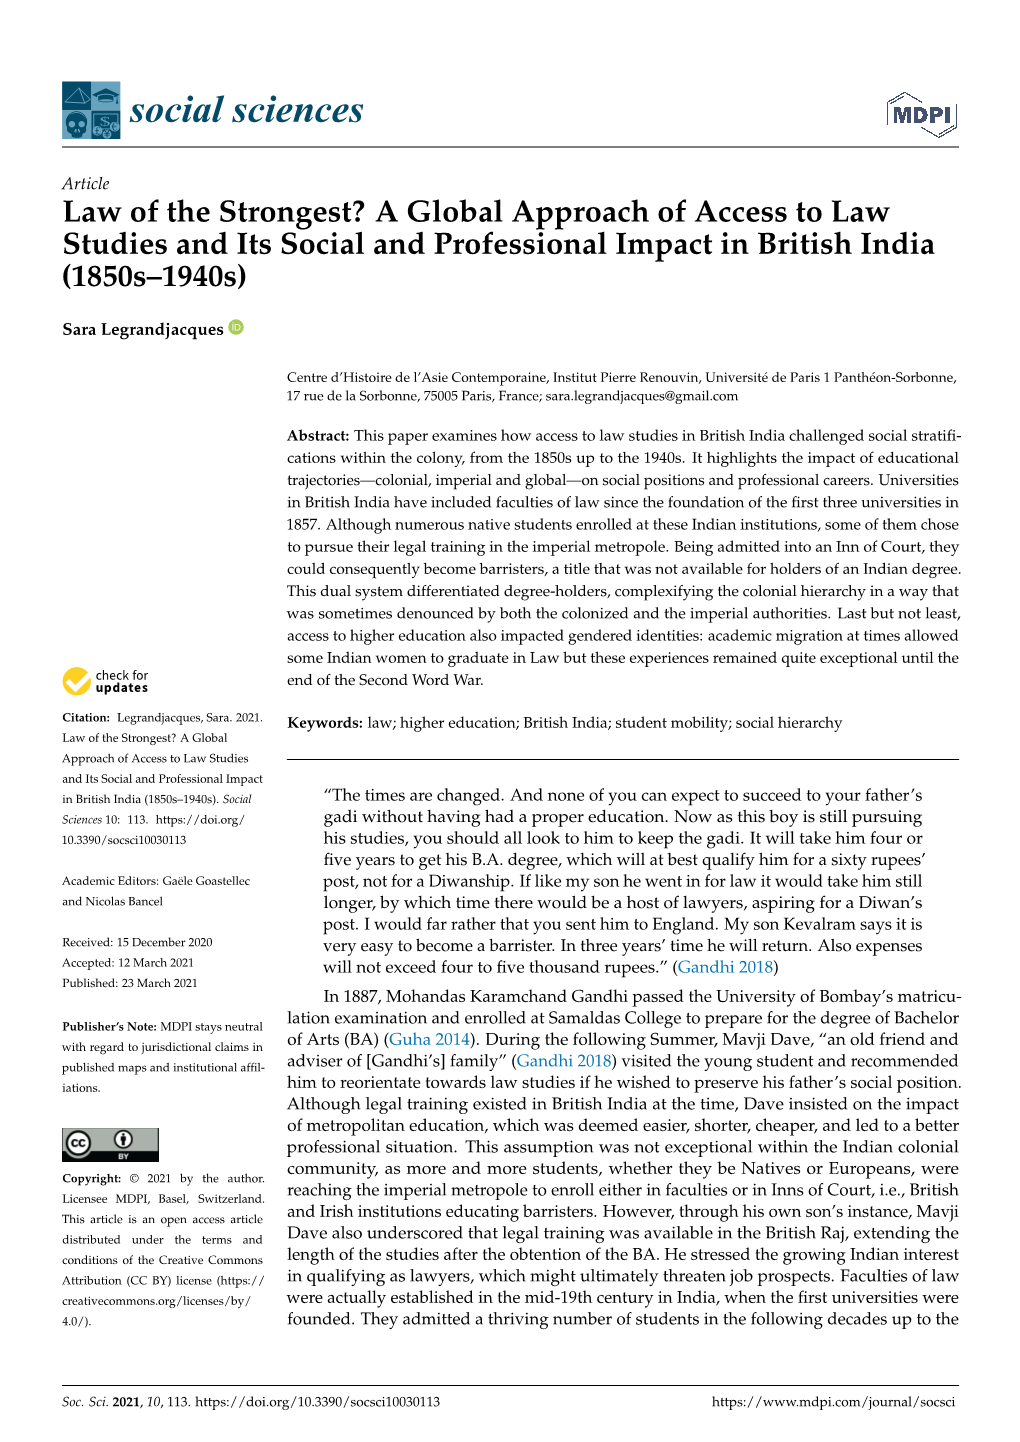 Law of the Strongest? a Global Approach of Access to Law Studies and Its Social and Professional Impact in British India (1850S–1940S)